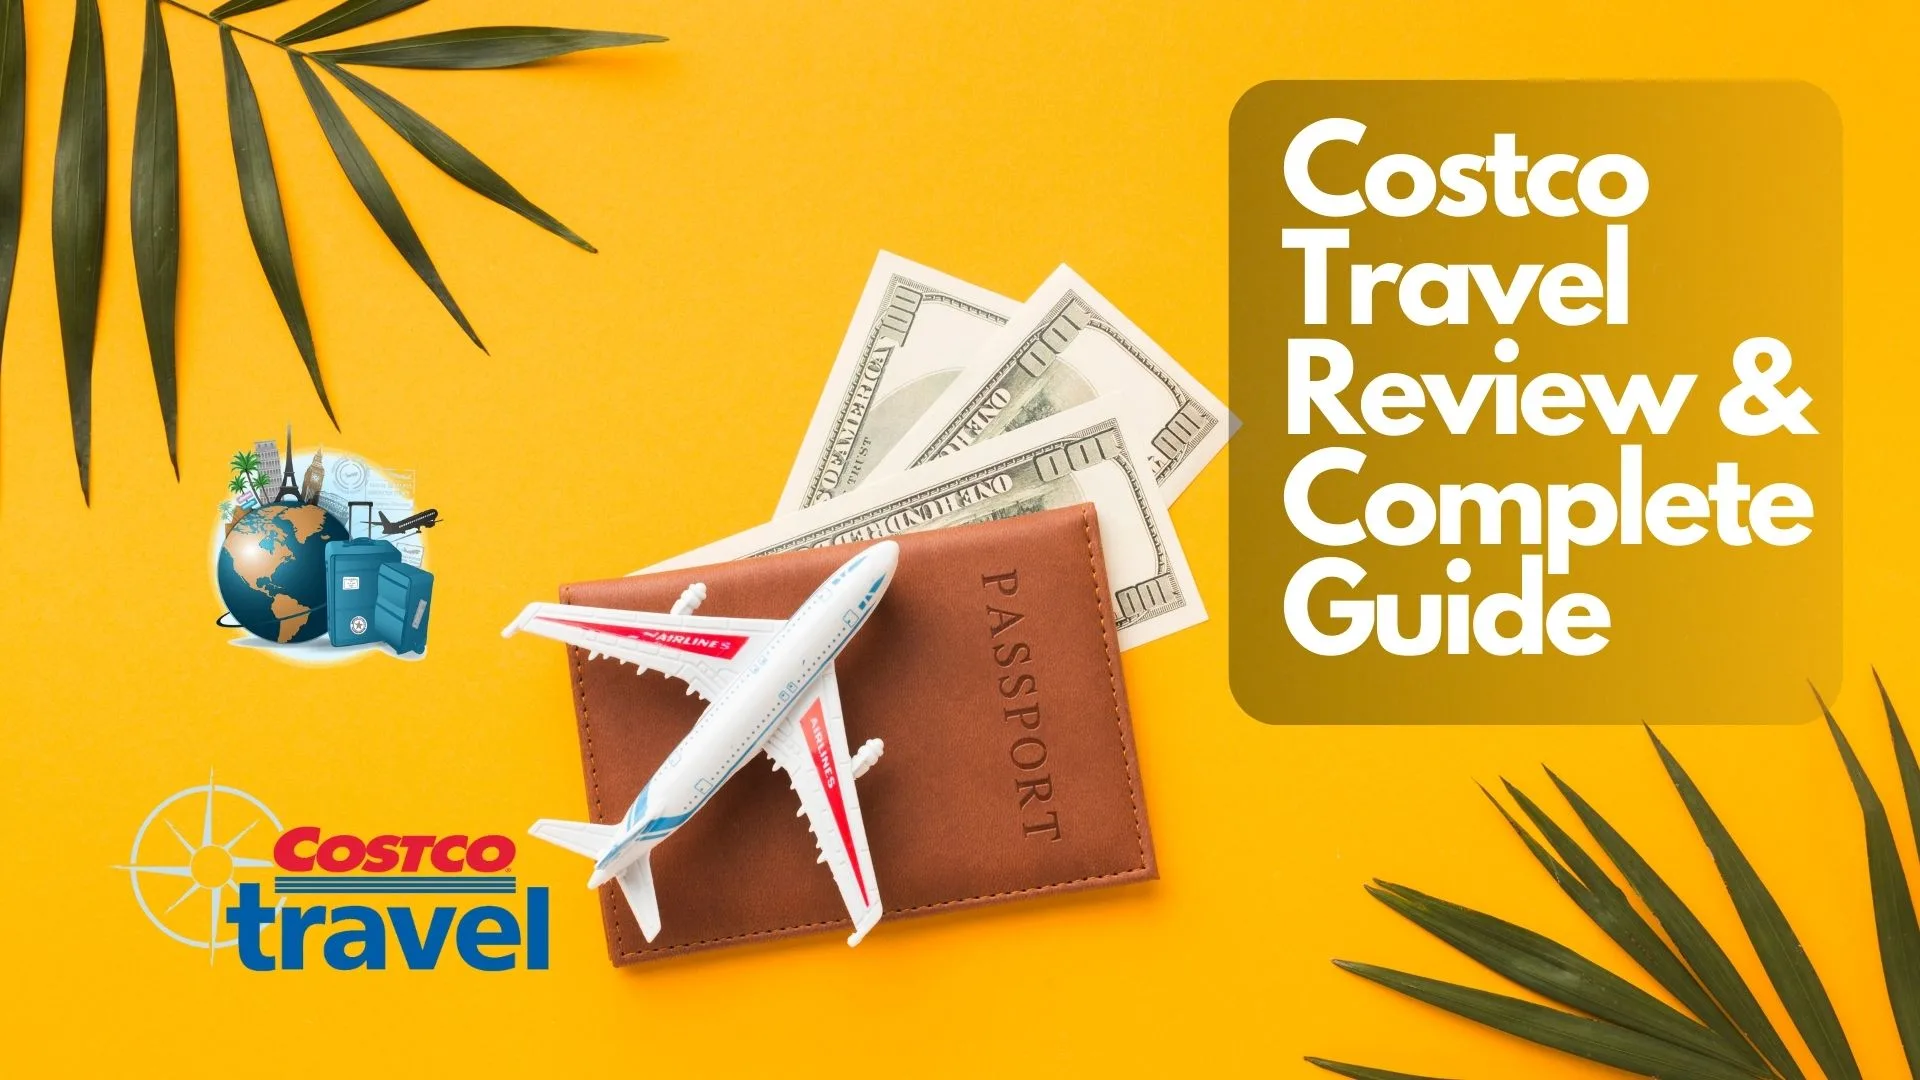 Costco Travel Review & Complete Guide: Save Money on Your Travels with ...